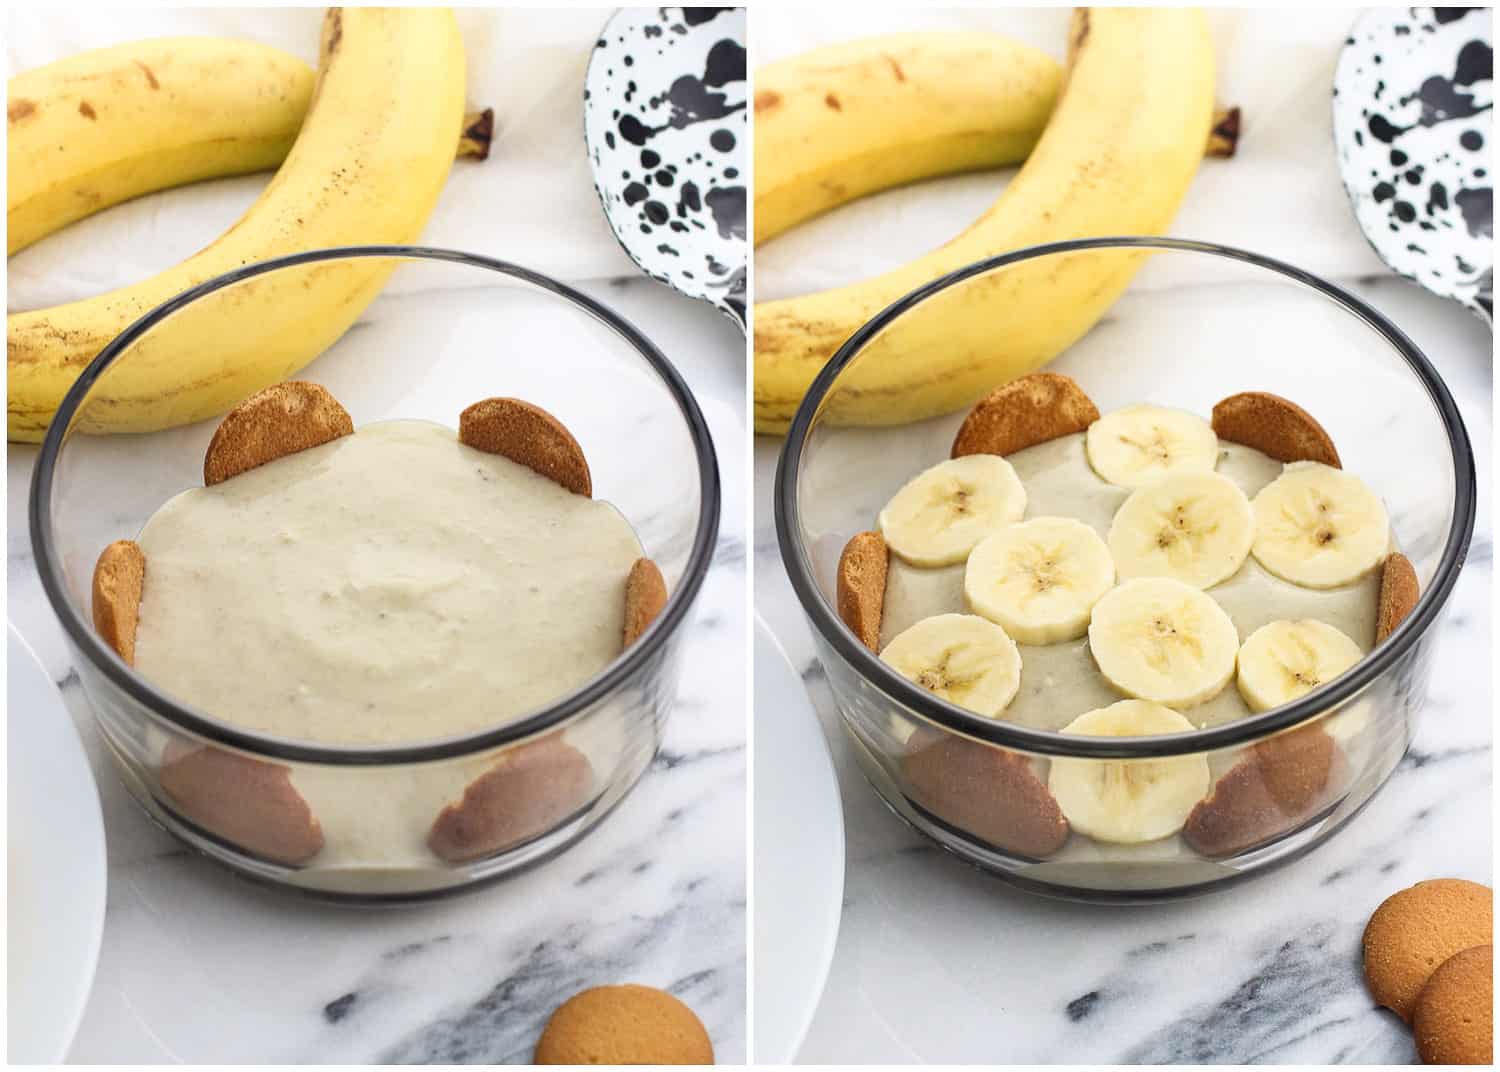 A layer of pudding and wafers in the trifle bowl (left) and after adding banana slices (right).